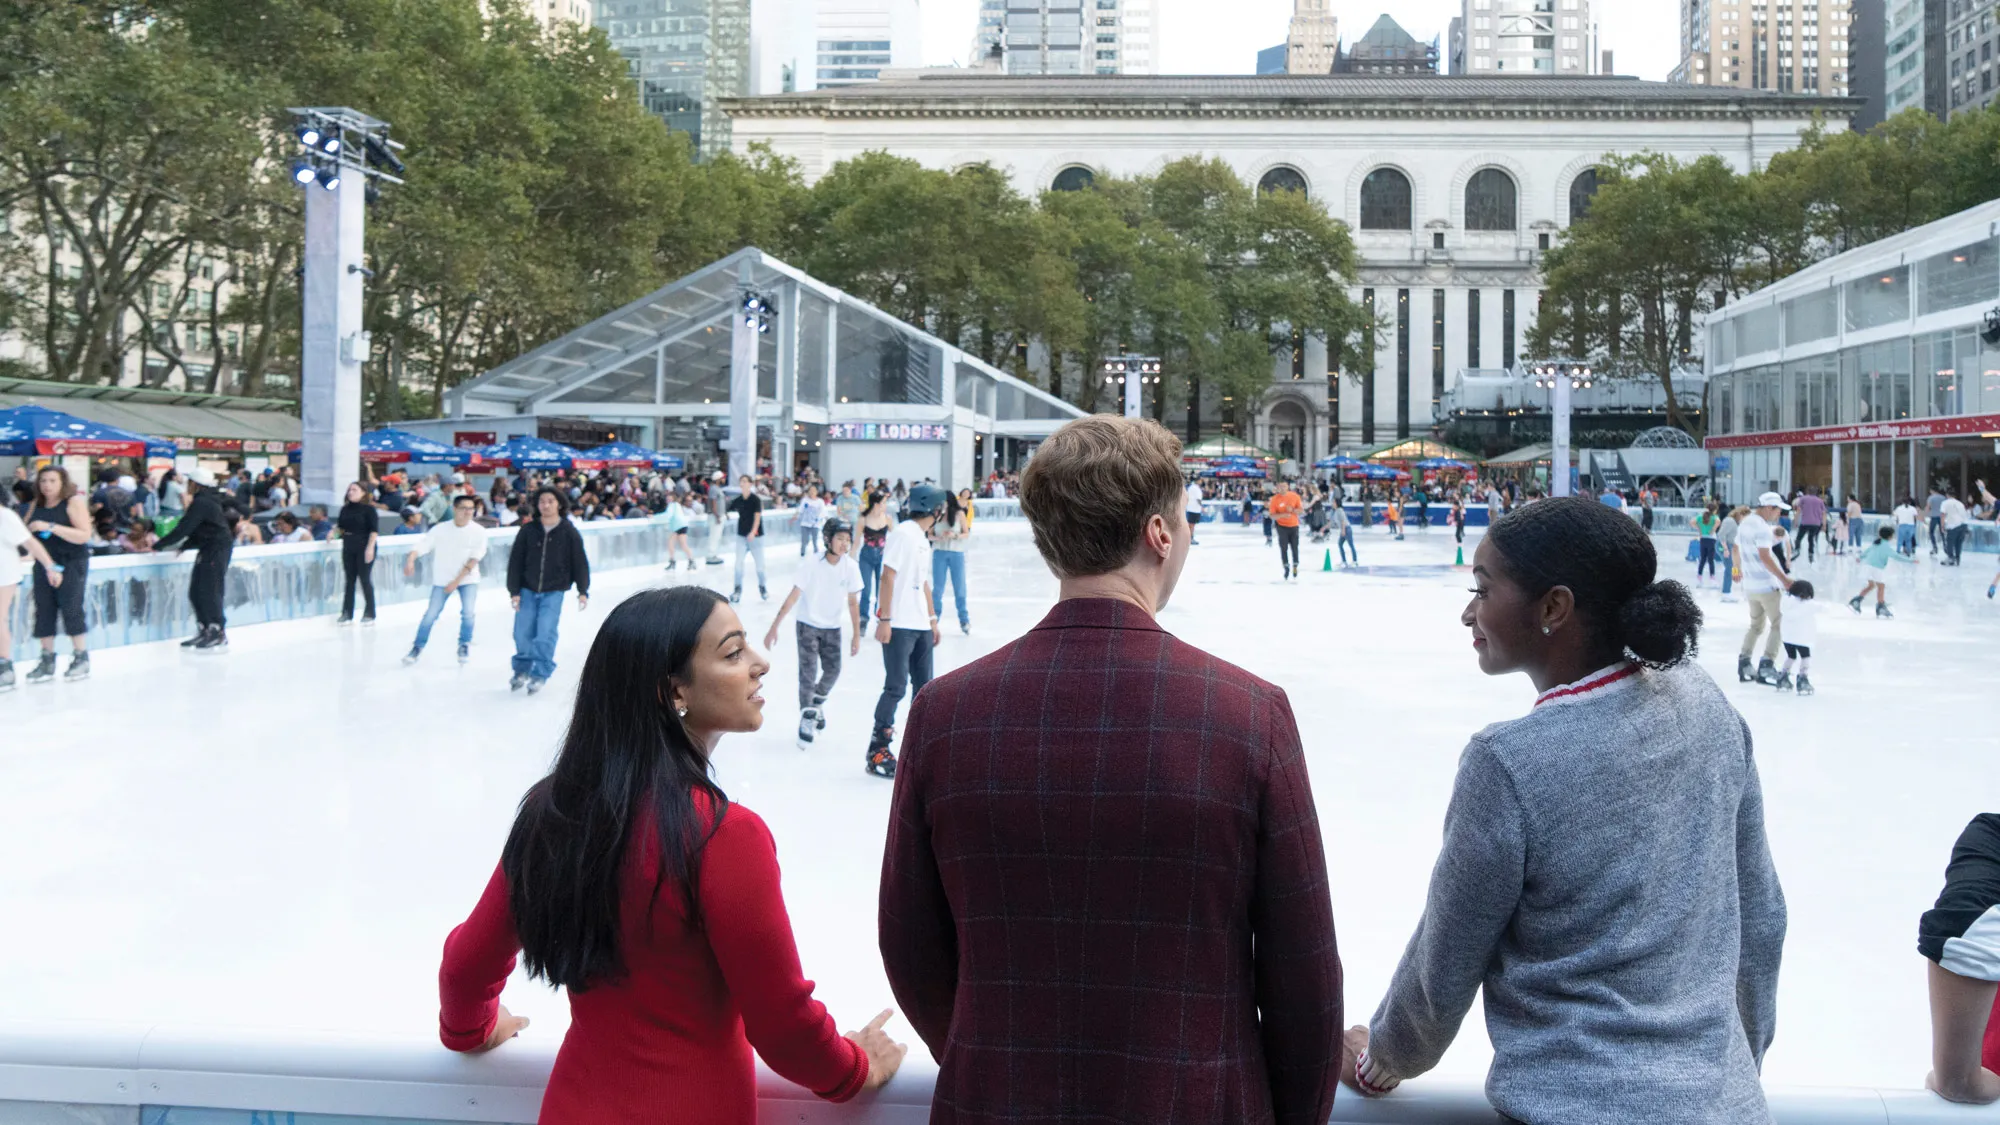 Three Buckeyes shown from behind watch ice skaters at a famous New York City outdoor rink.